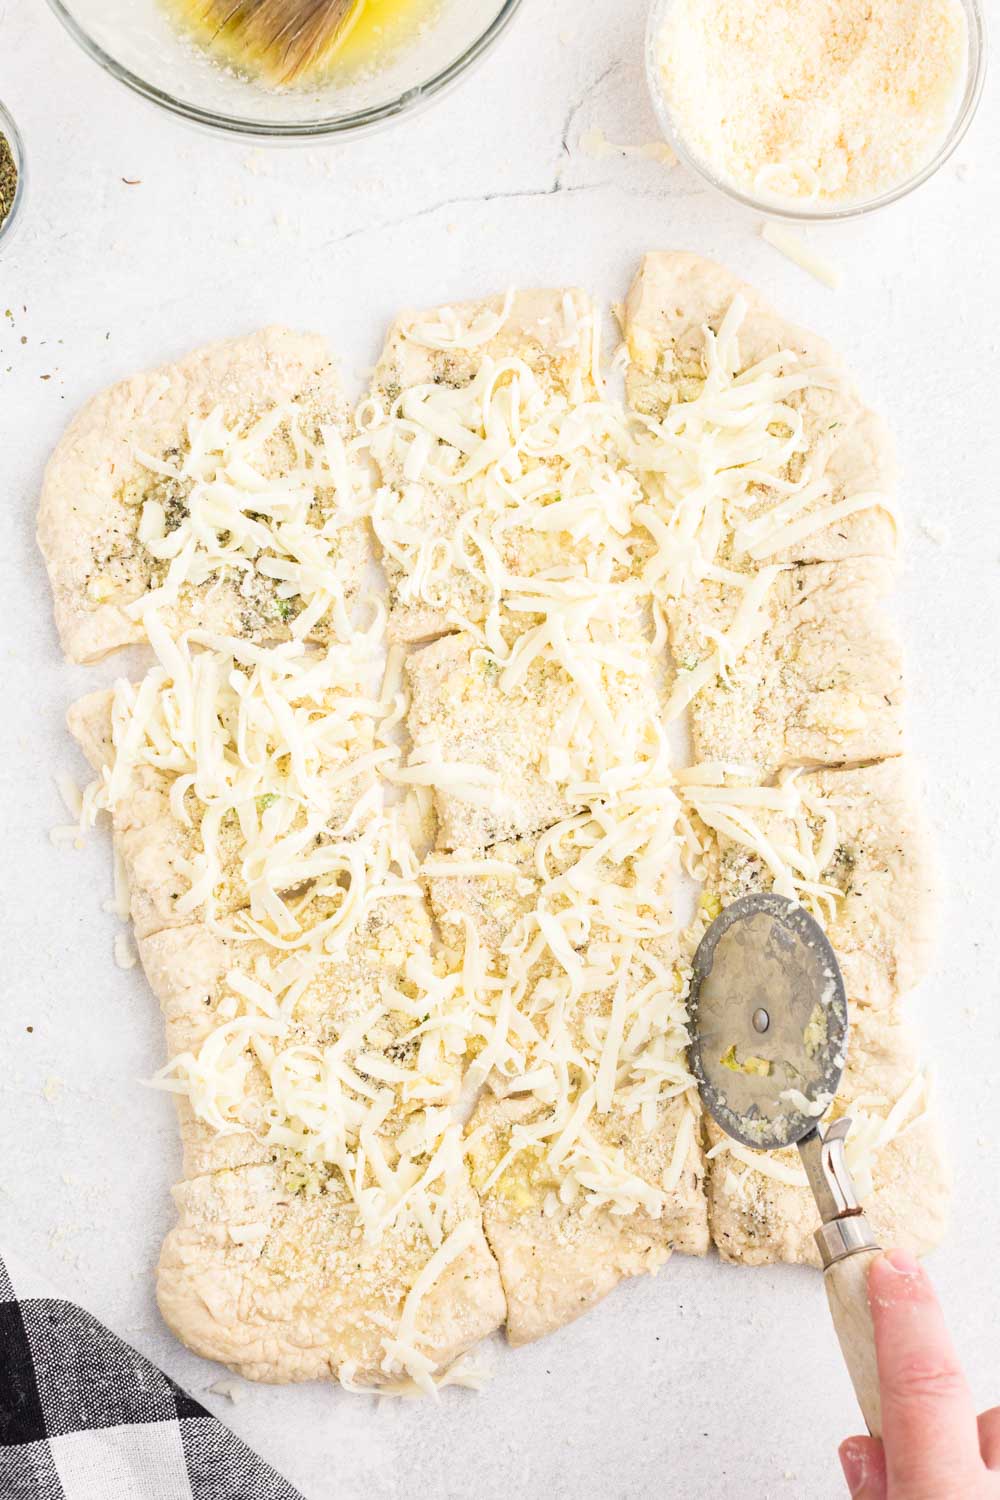 Bread dough with seasoning and grated cheese, pizza cutter slicing squares, on a white marble surface.